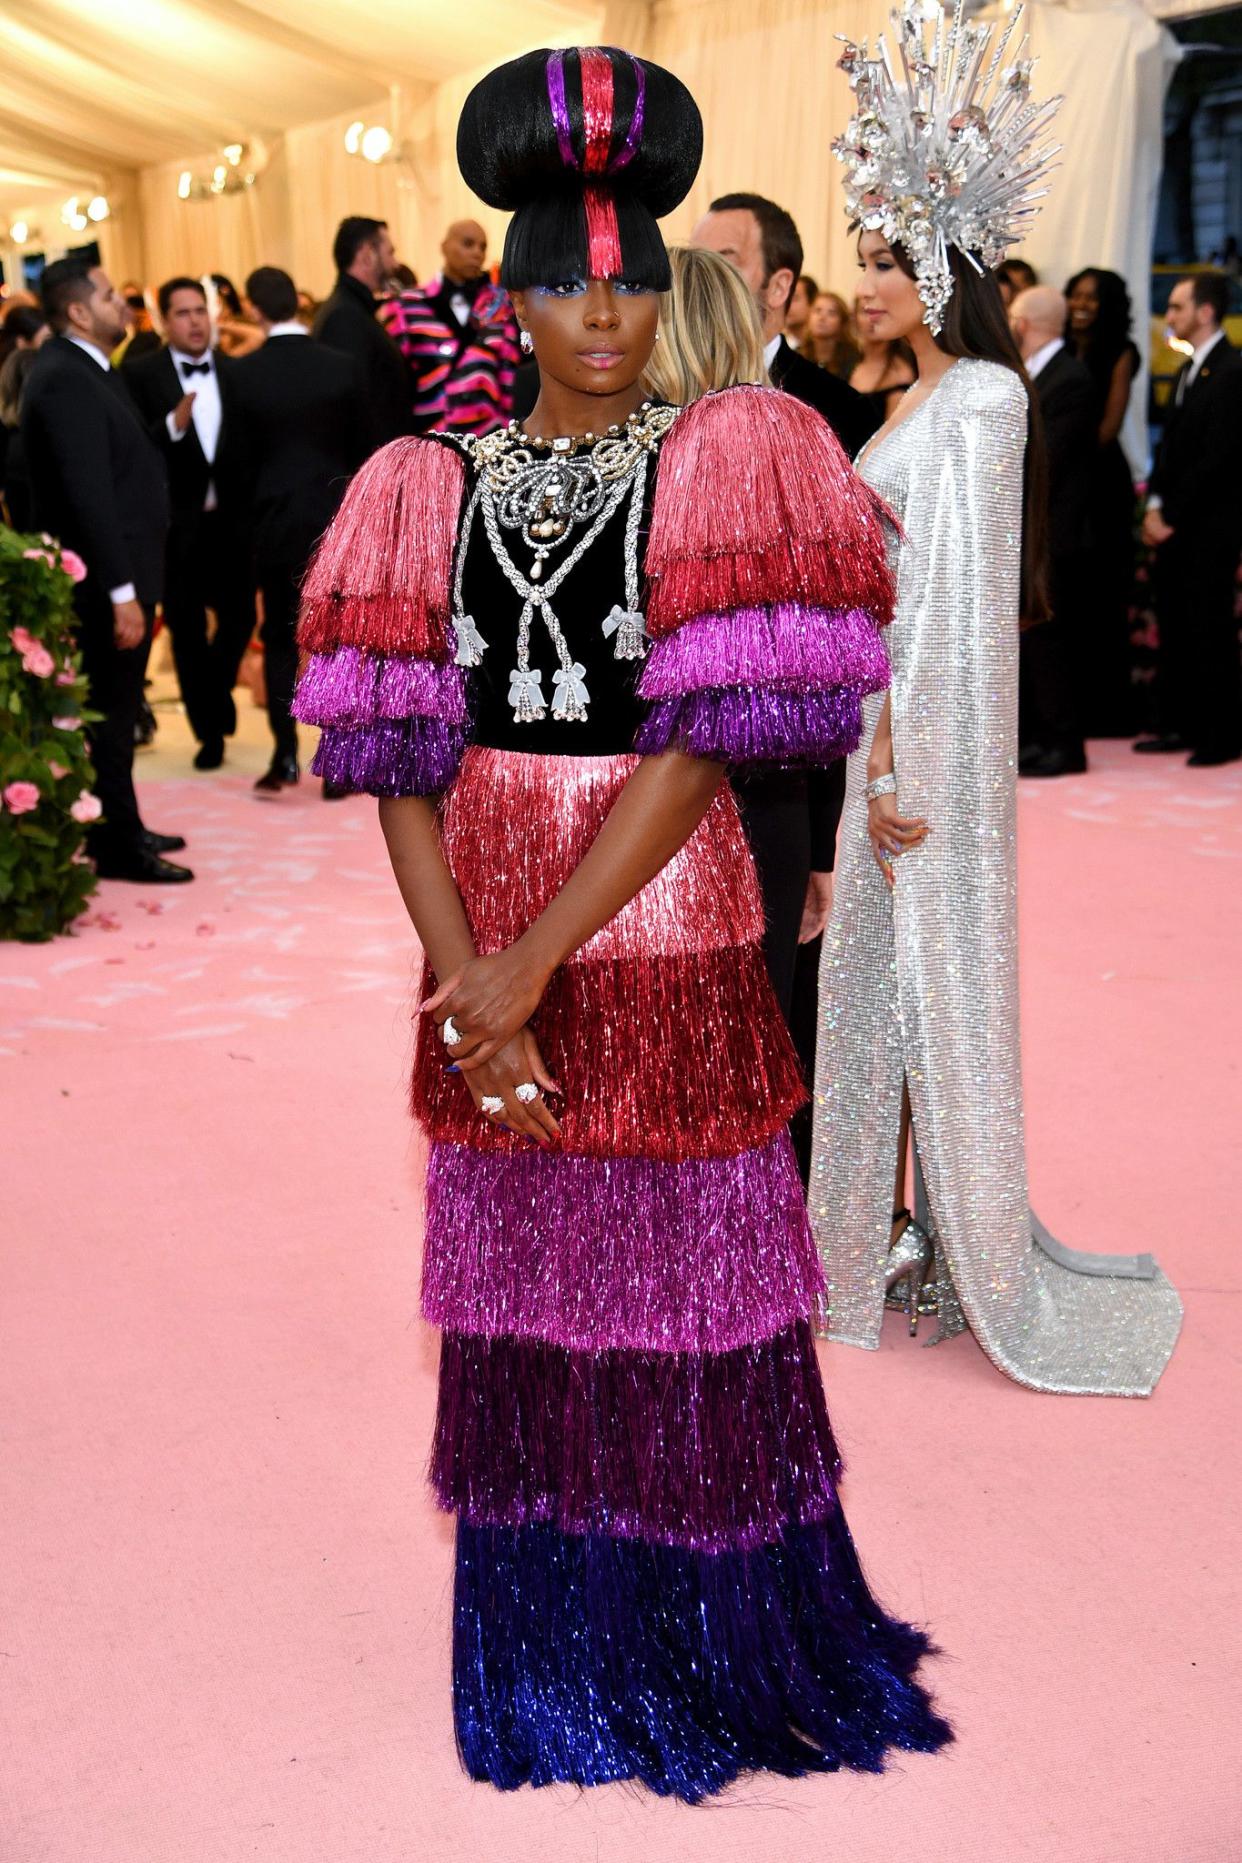 Kiki Layne attends The 2019 Met Gala Celebrating Camp: Notes on Fashion at Metropolitan Museum of Art on May 06, 2019 in New York City. (Photo by Dimitrios Kambouris/Getty Images for The Met Museum/Vogue)